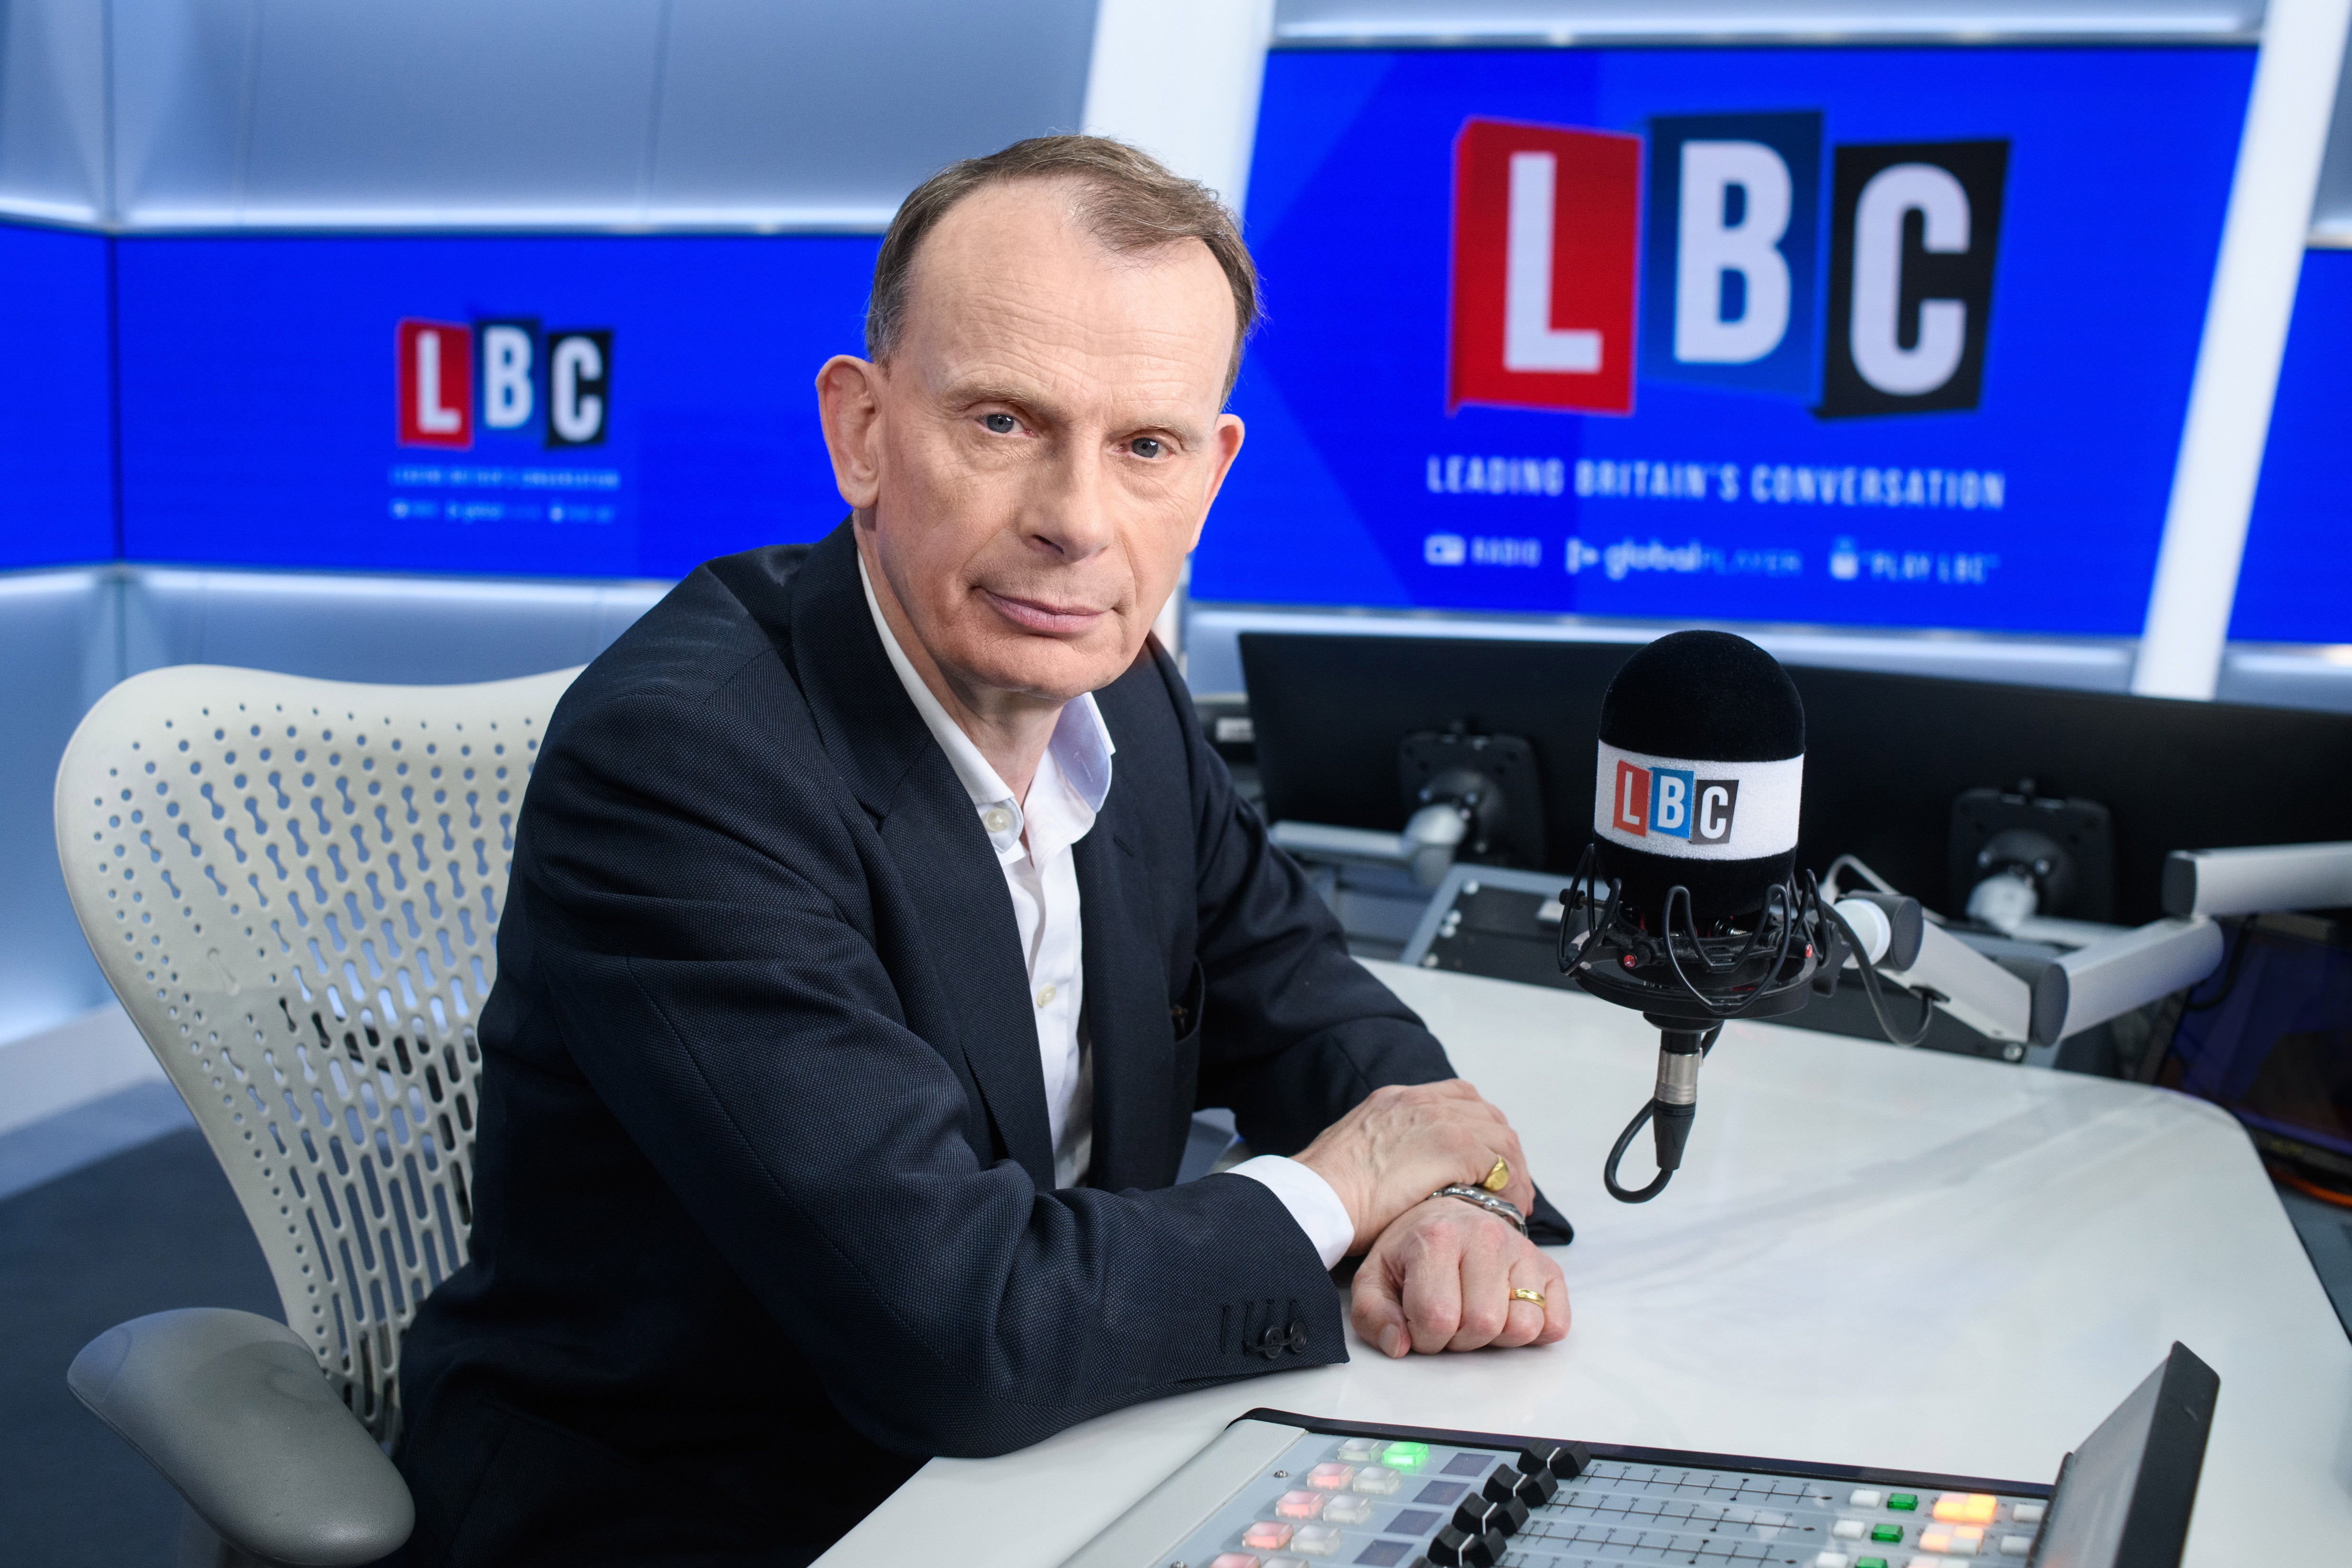 Andrew Marr says new radio show will ruffle feathers | The Independent